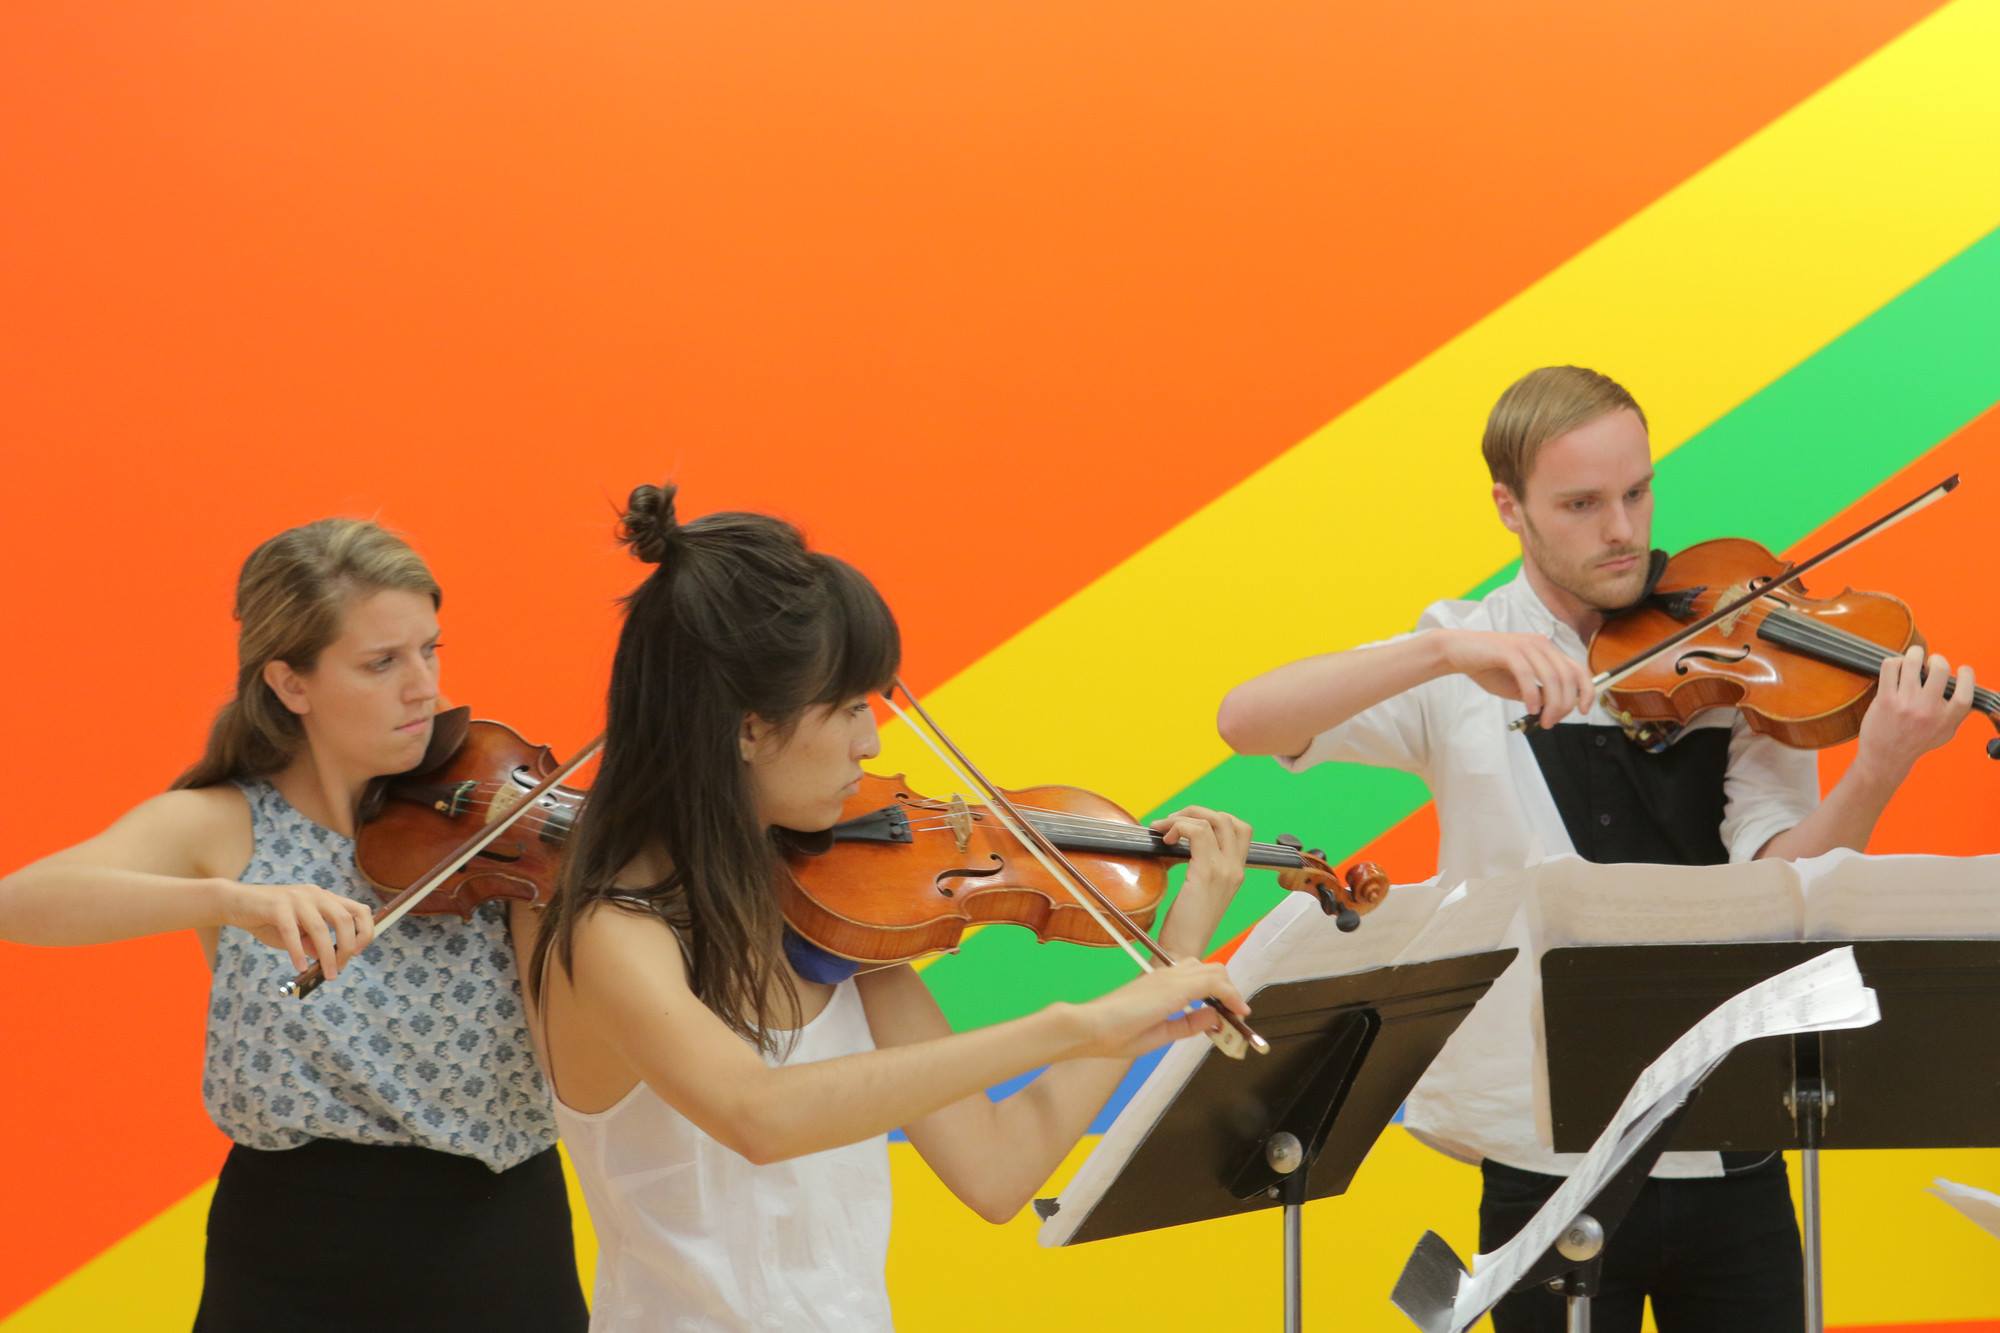 Kate Outterbridge, Lena Vidulich and Kieran Welch performing at Bang on a Can Summer Festival. Image courtesy of Massachusetts Museum of Contemporary Art.